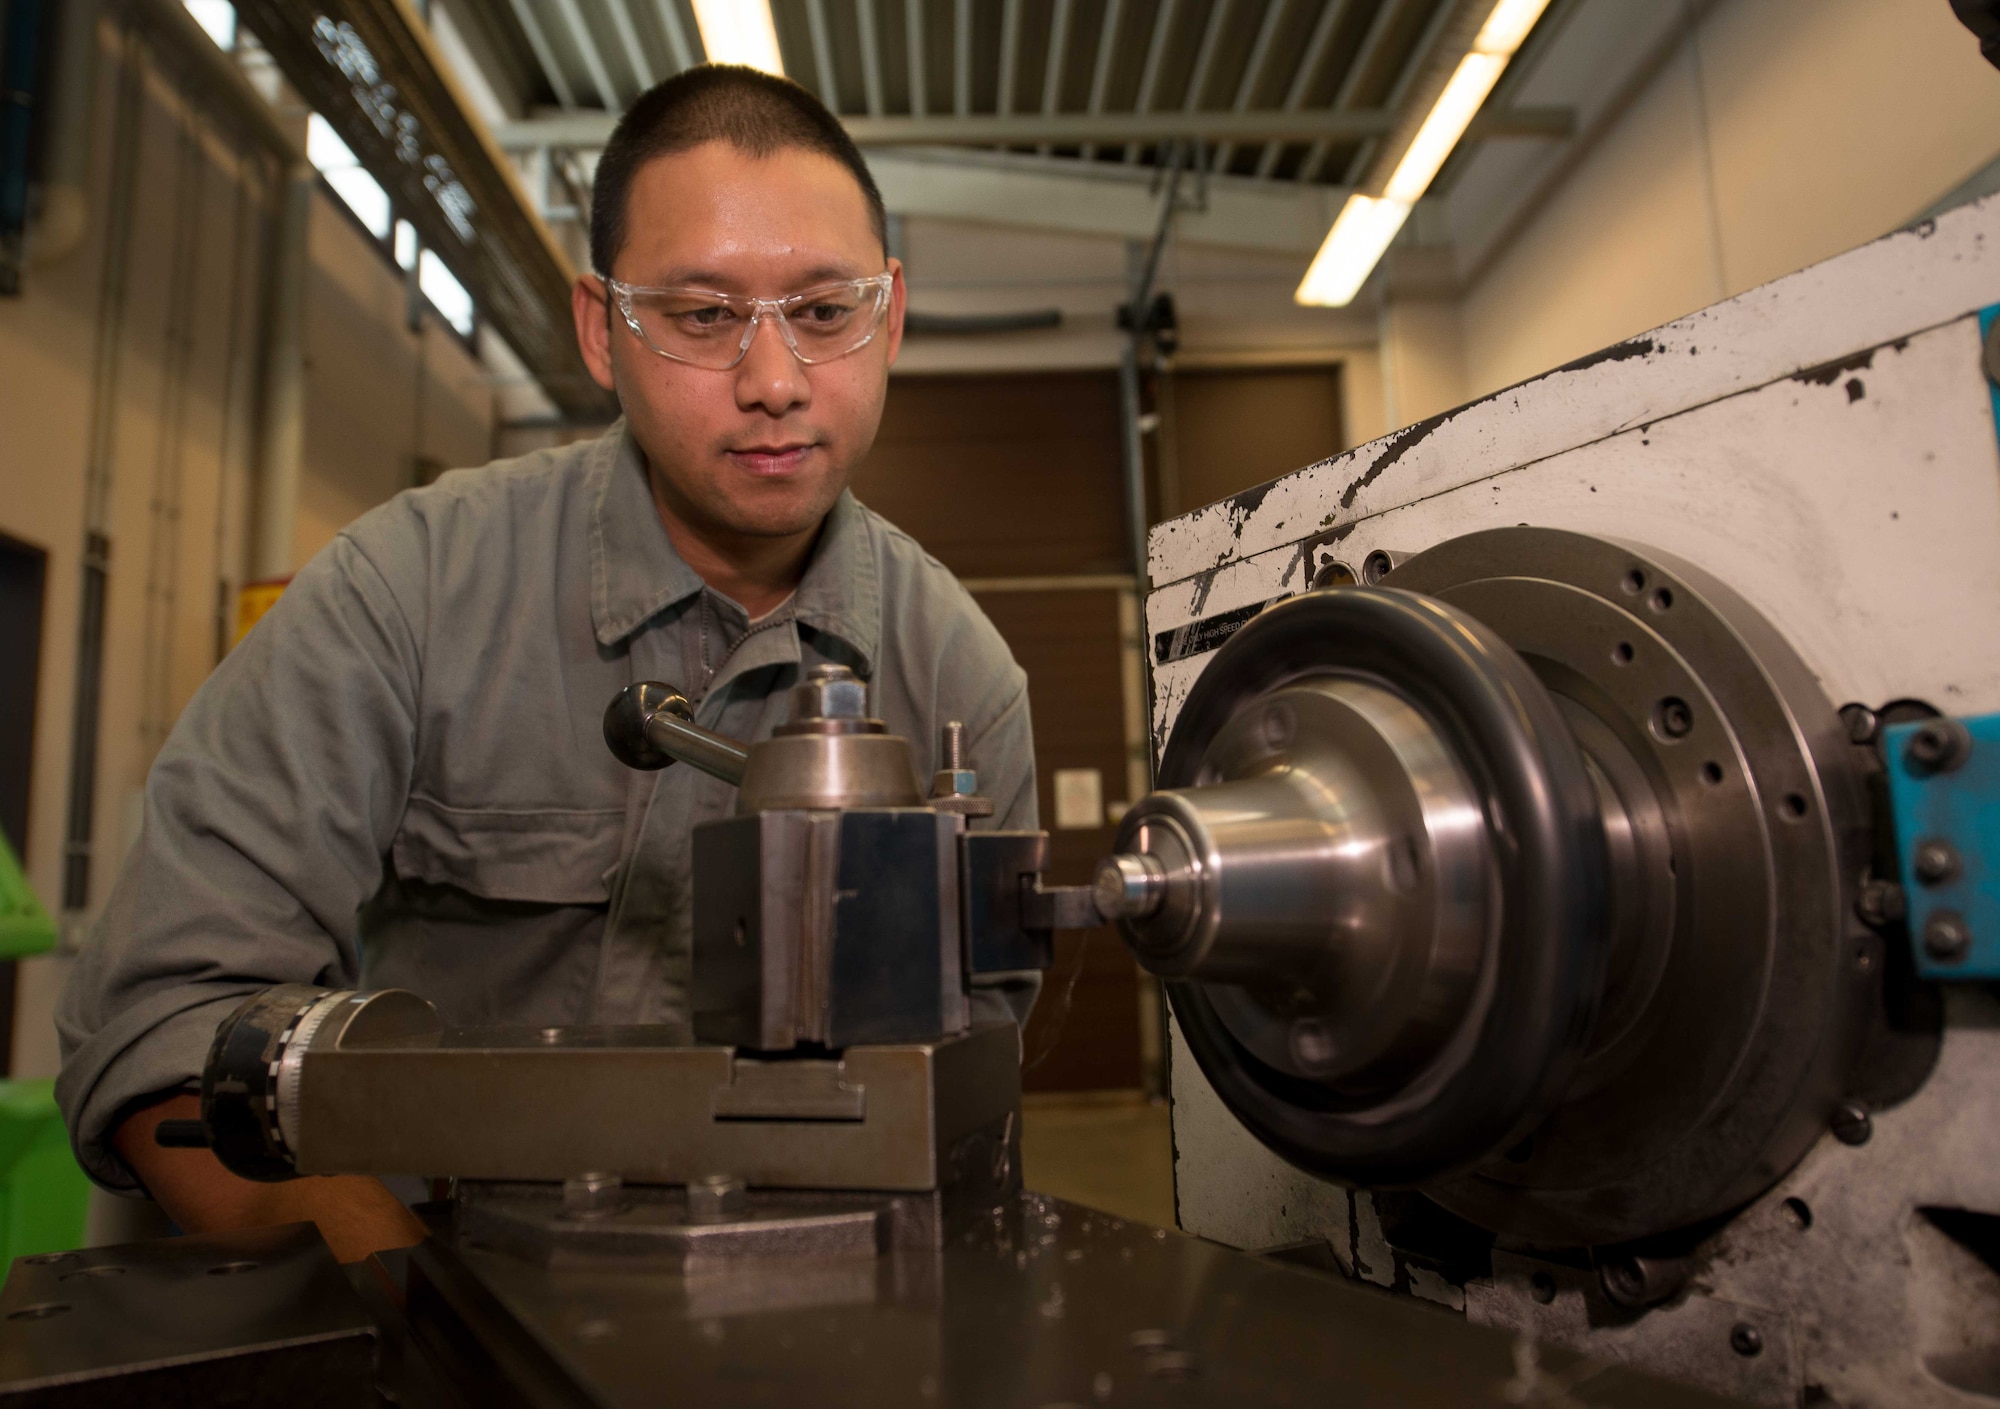 Staff Sgt. Mark Leyva, 86th Maintenance Squadron aircraft metals technology floor supervisor, makes a steel bolt with a lathe at Ramstein Air Base, Germany, May 3, 2017.  The aircraft metals technology shop supports the flight line by creating tools and aircraft parts, including those that may otherwise be difficult or impossible to obtain through purchase because they are too far away or out of production. (U.S. Air Force photo by Senior Airman Elizabeth Baker/Released)